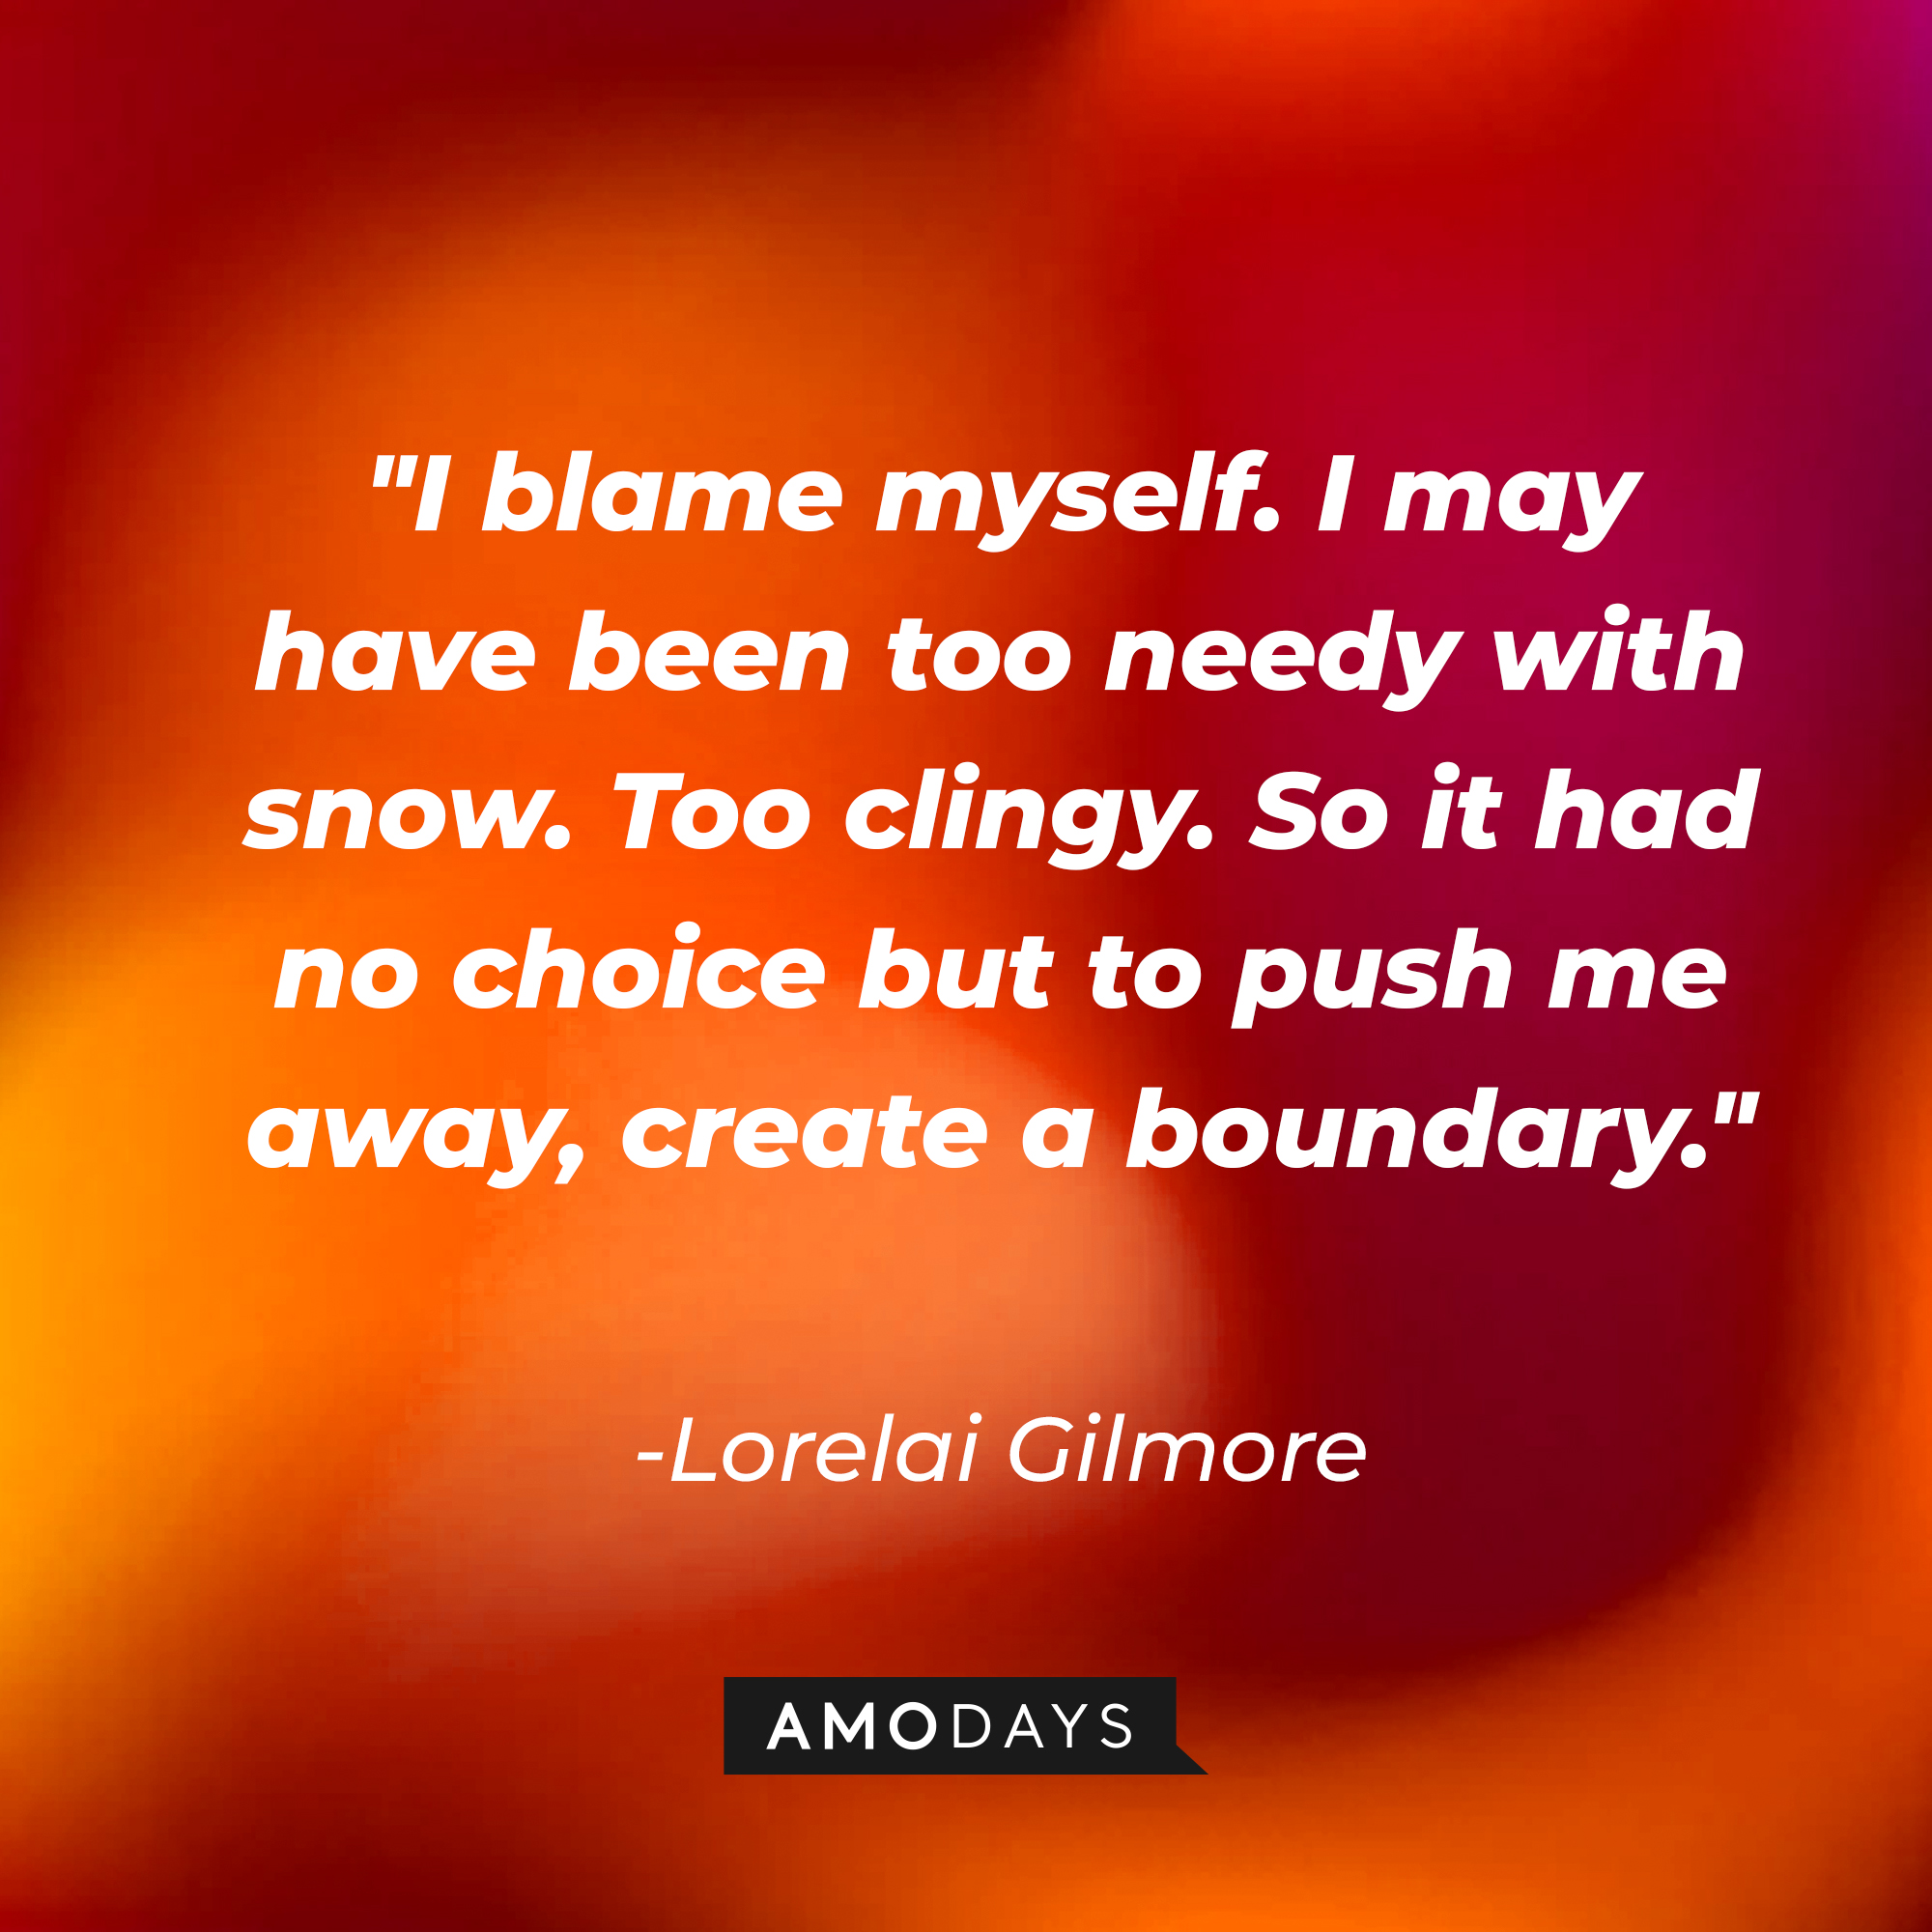 Lorelai Gilmore's quote: "I blame myself. I may have been too needy with snow. Too clingy. So it had no choice but to push me away, create a boundary." | Source: AmoDays